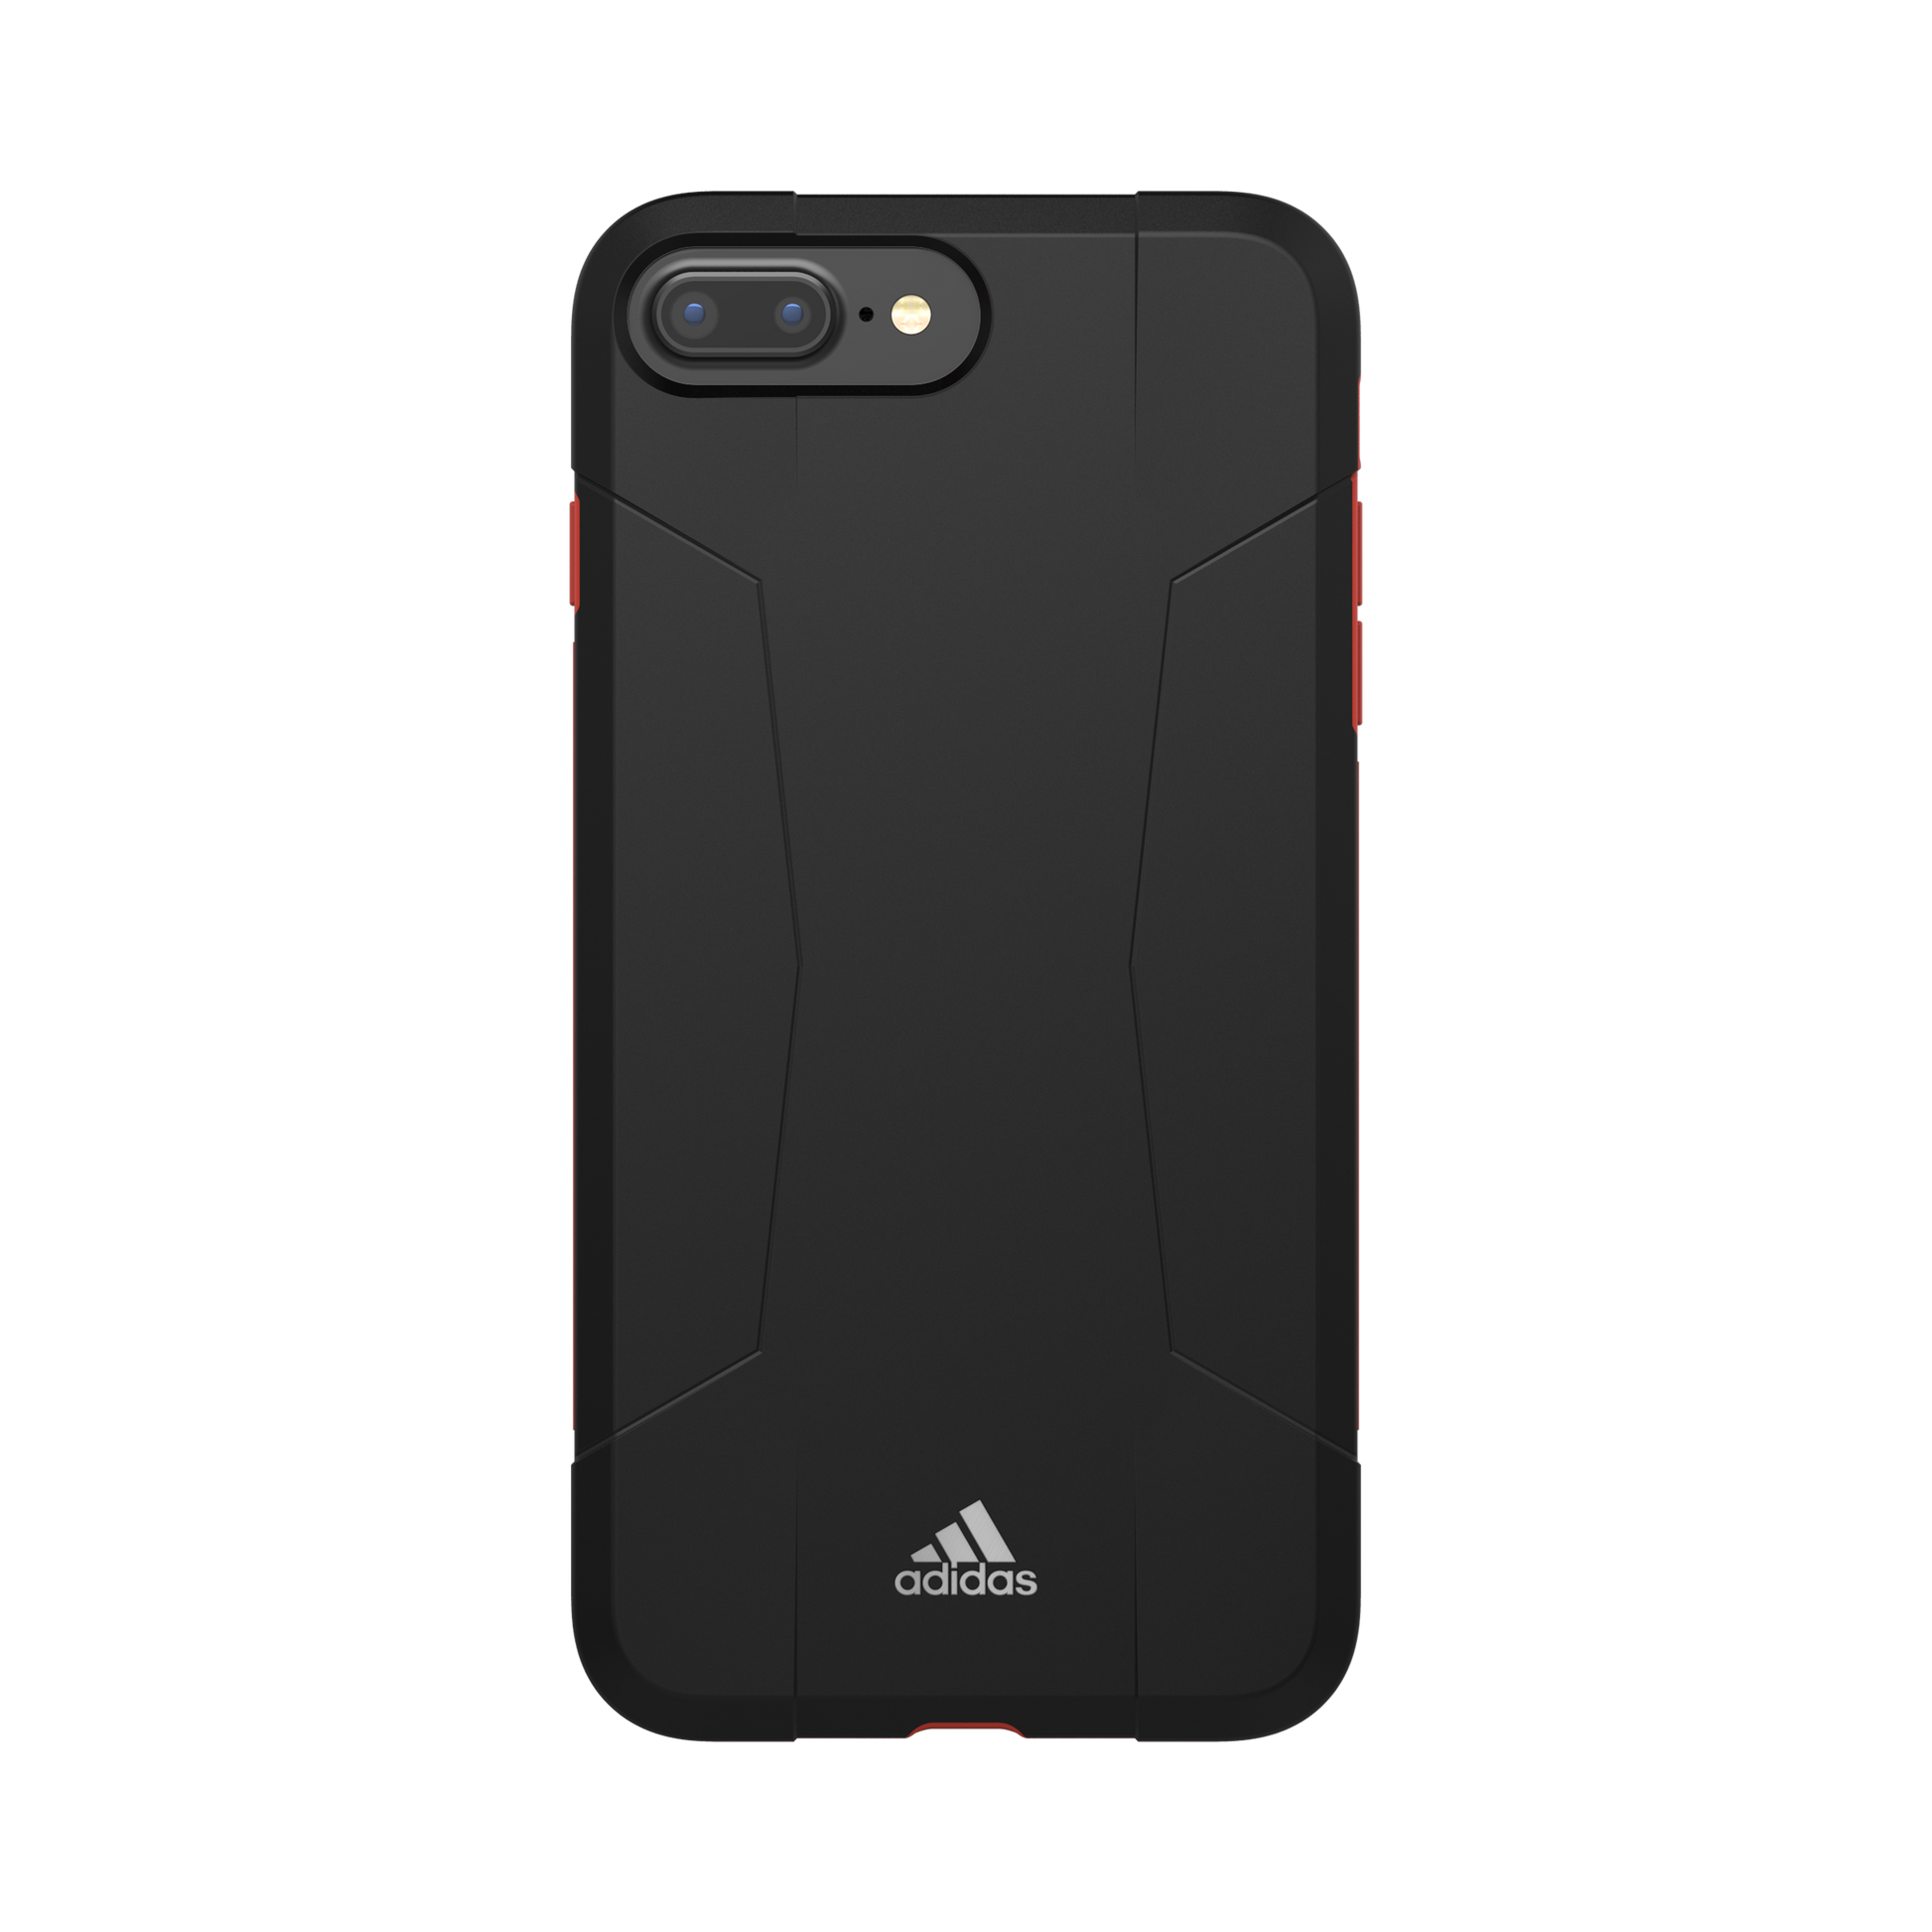 adidas Sports Solo Case Black - Red iPhone 1 29251